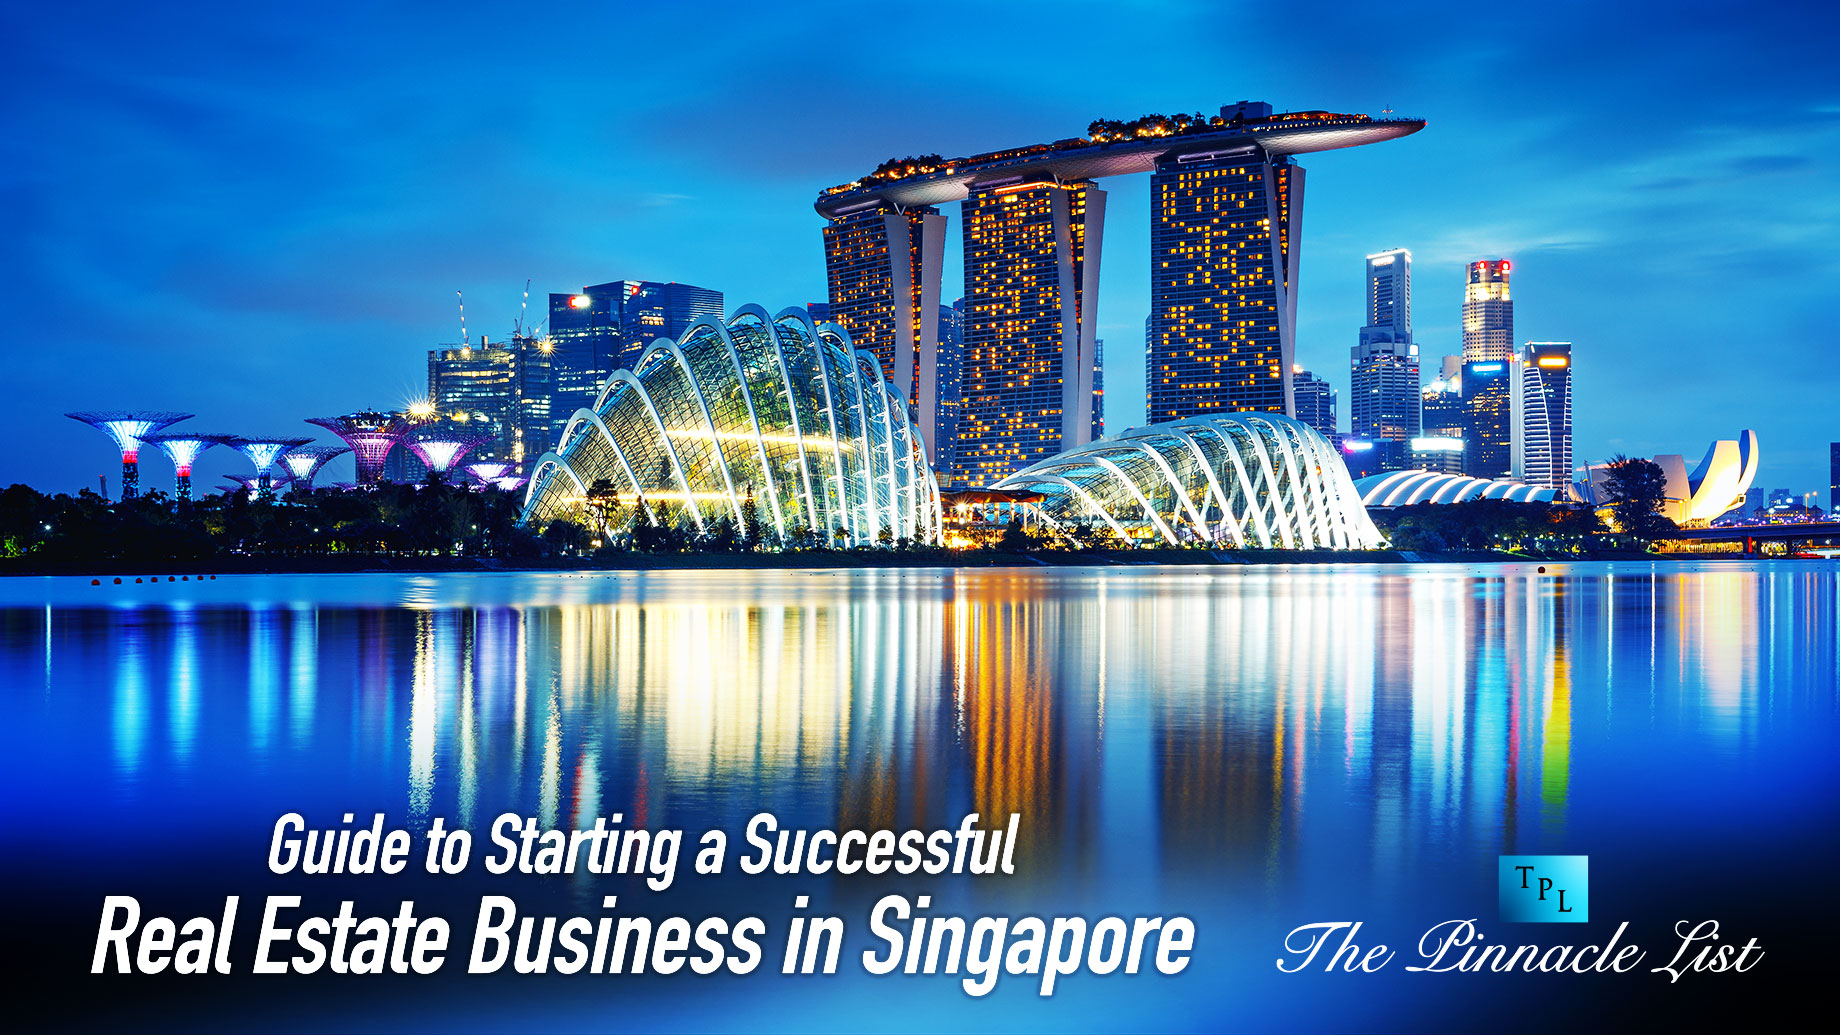 Guide to Starting a Successful Real Estate Business in Singapore